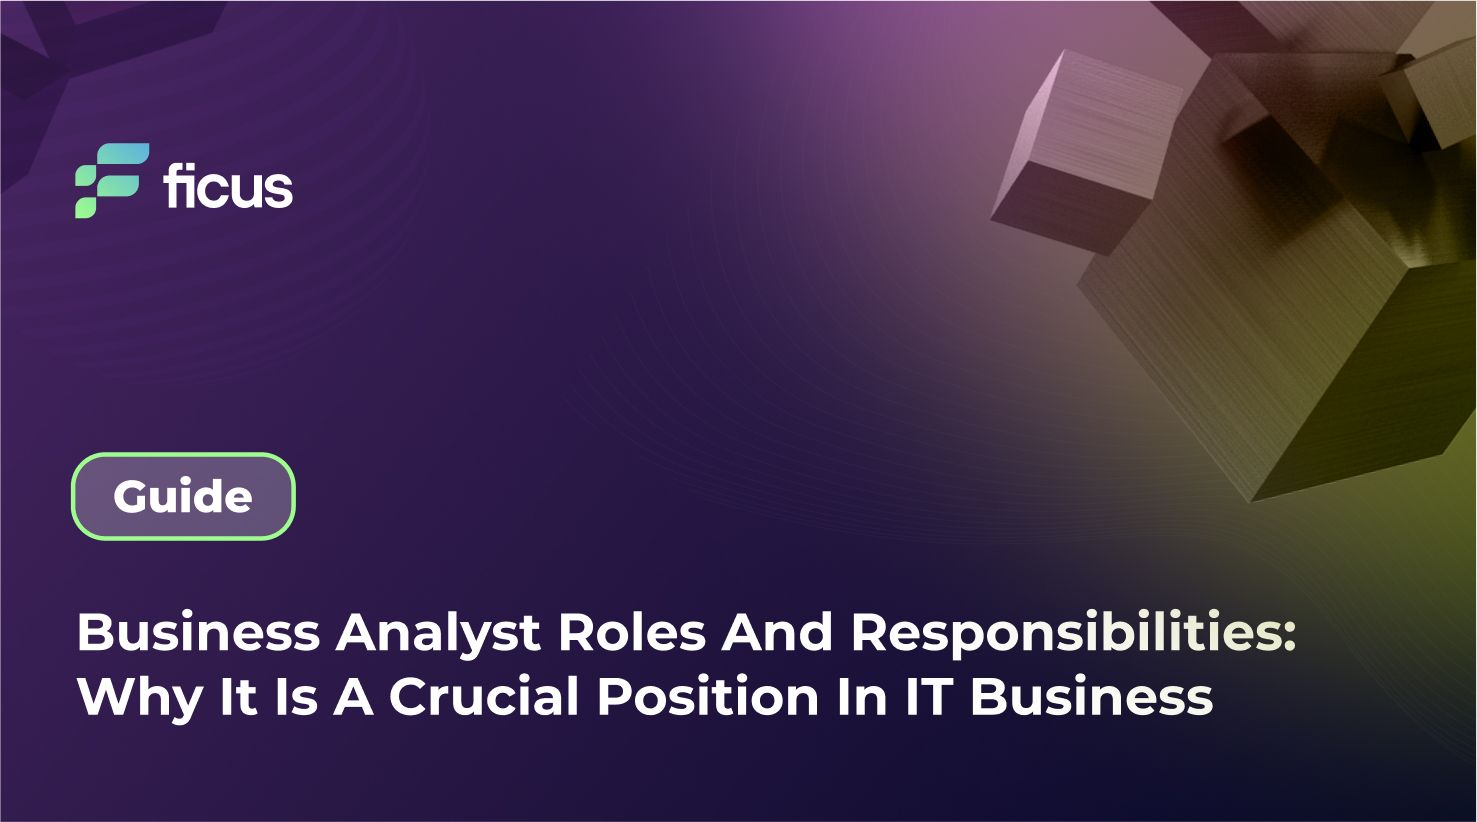 Business Analyst Roles And Responsibilities_ Why It Is A Crucial Position In IT Business